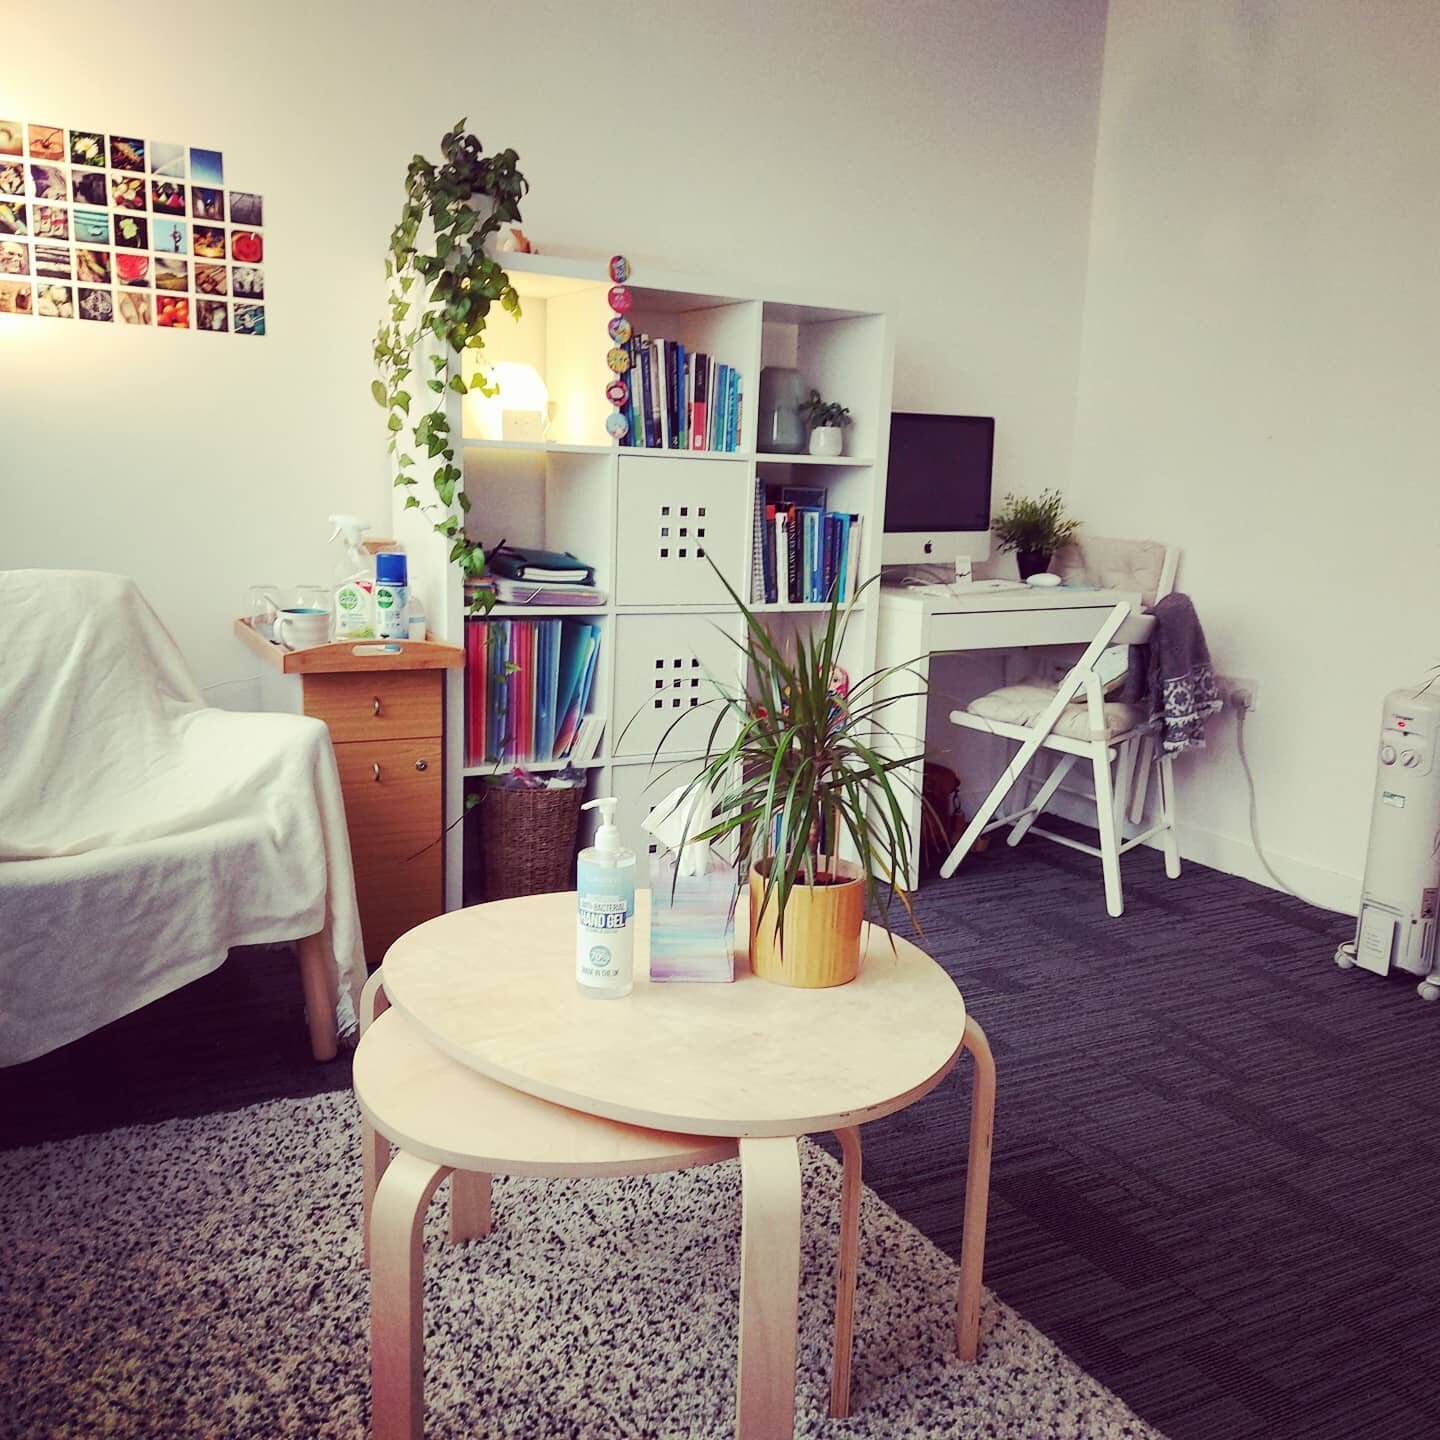 Forever adapting and changing, my little therapy room has socially distanced seating, desk space for me to type and after an upcoming IKEA trip some new drawers to store all creative tools! #therapyroom #counsellingyoungpeople #counsellorsofinstagram